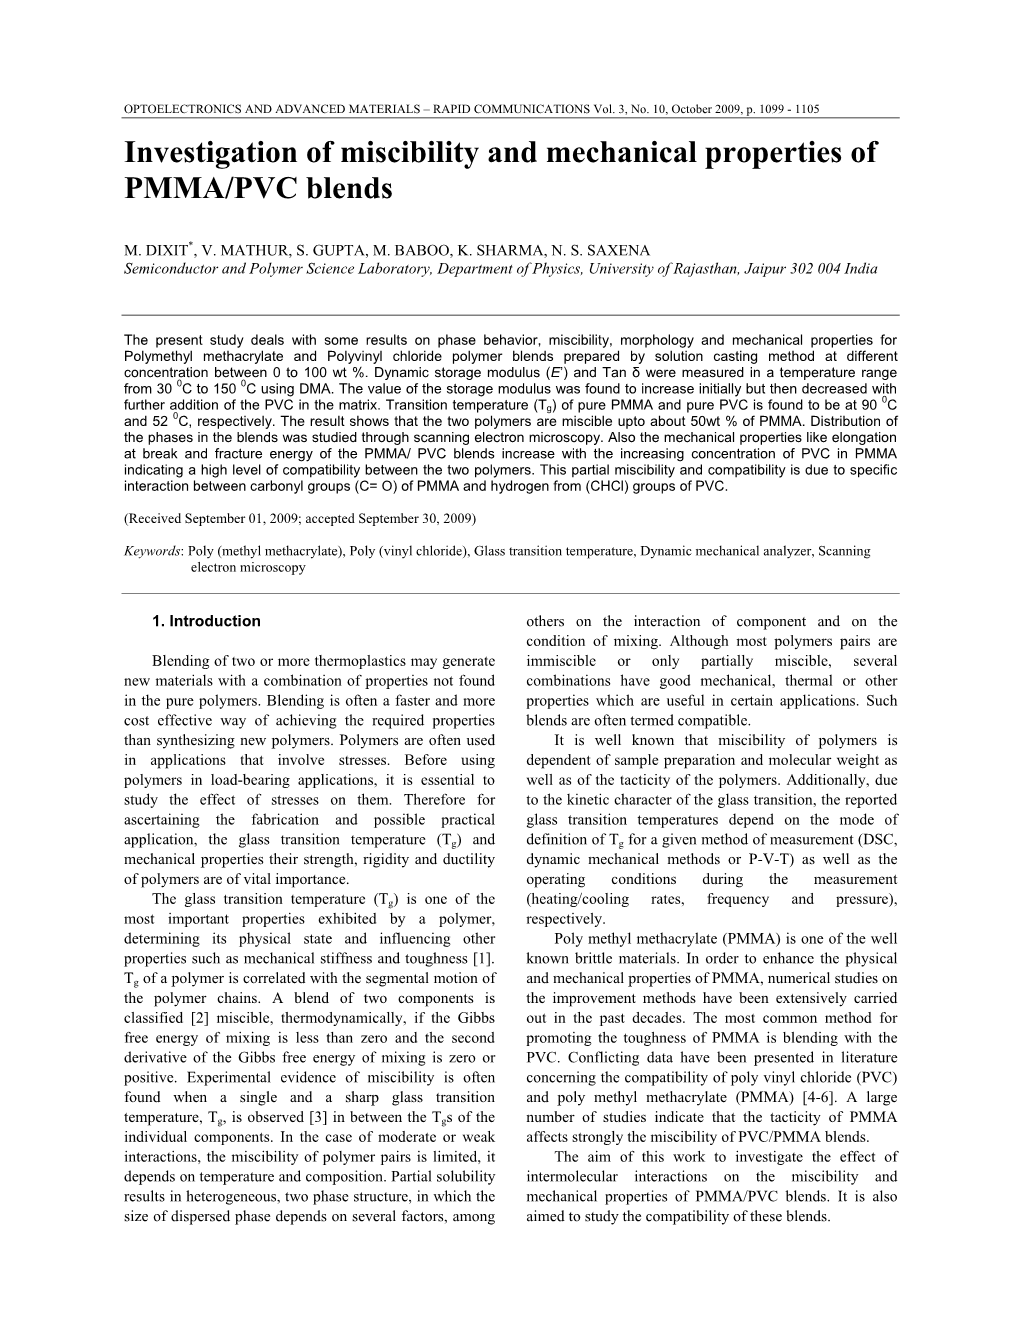 Investigation of Miscibility and Mechanical Properties of PMMA/PVC Blends